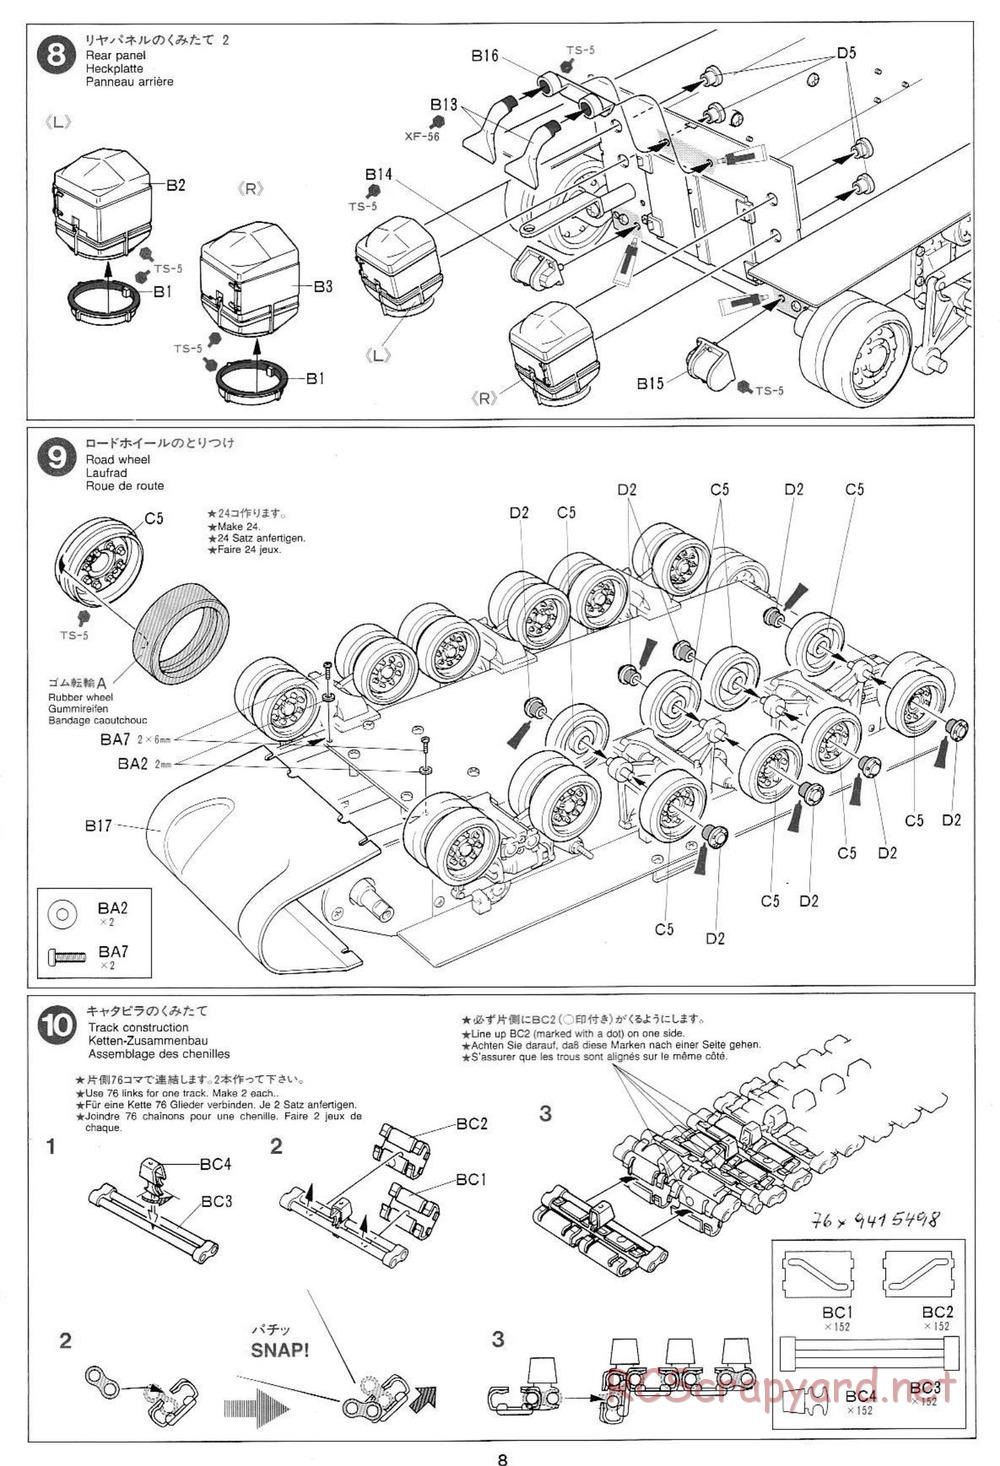 Tamiya - M4 Sherman 105mm Howitzer - 1/16 Scale Chassis - Manual - Page 8